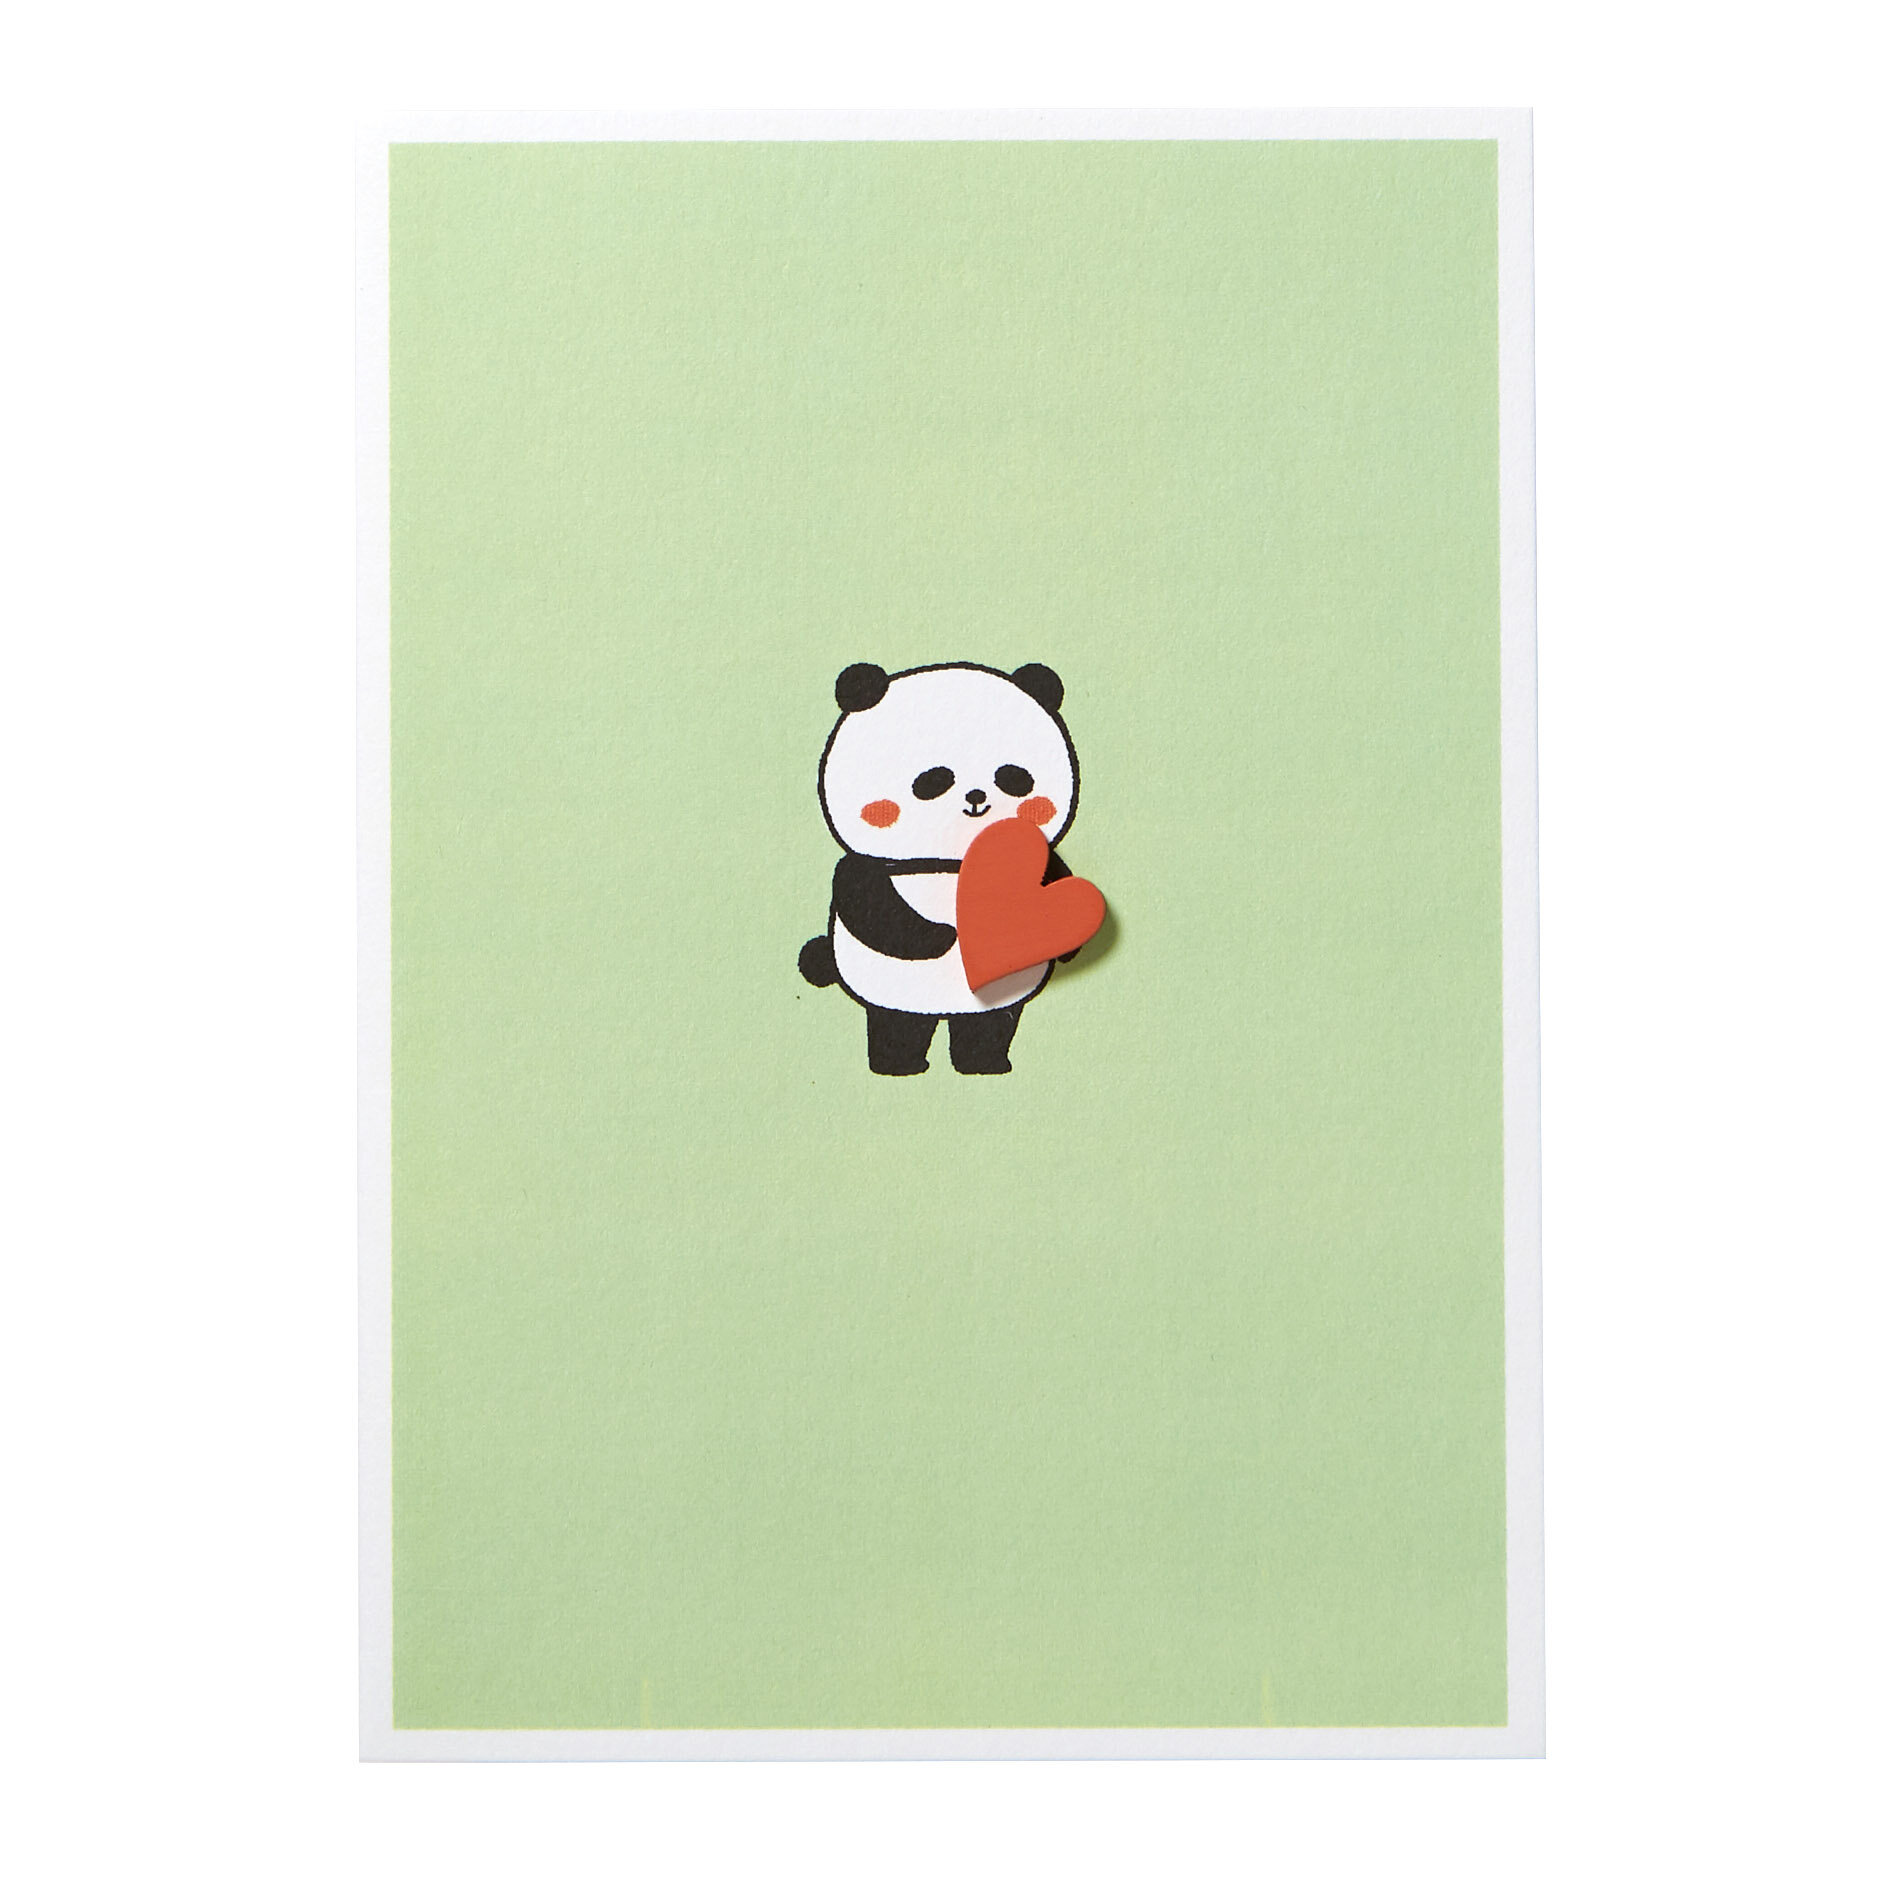 Panda Holding Heart Anniversary Card — Larkwood Studio Buy Stationery and  Greeting Cards - The gift of personal expression